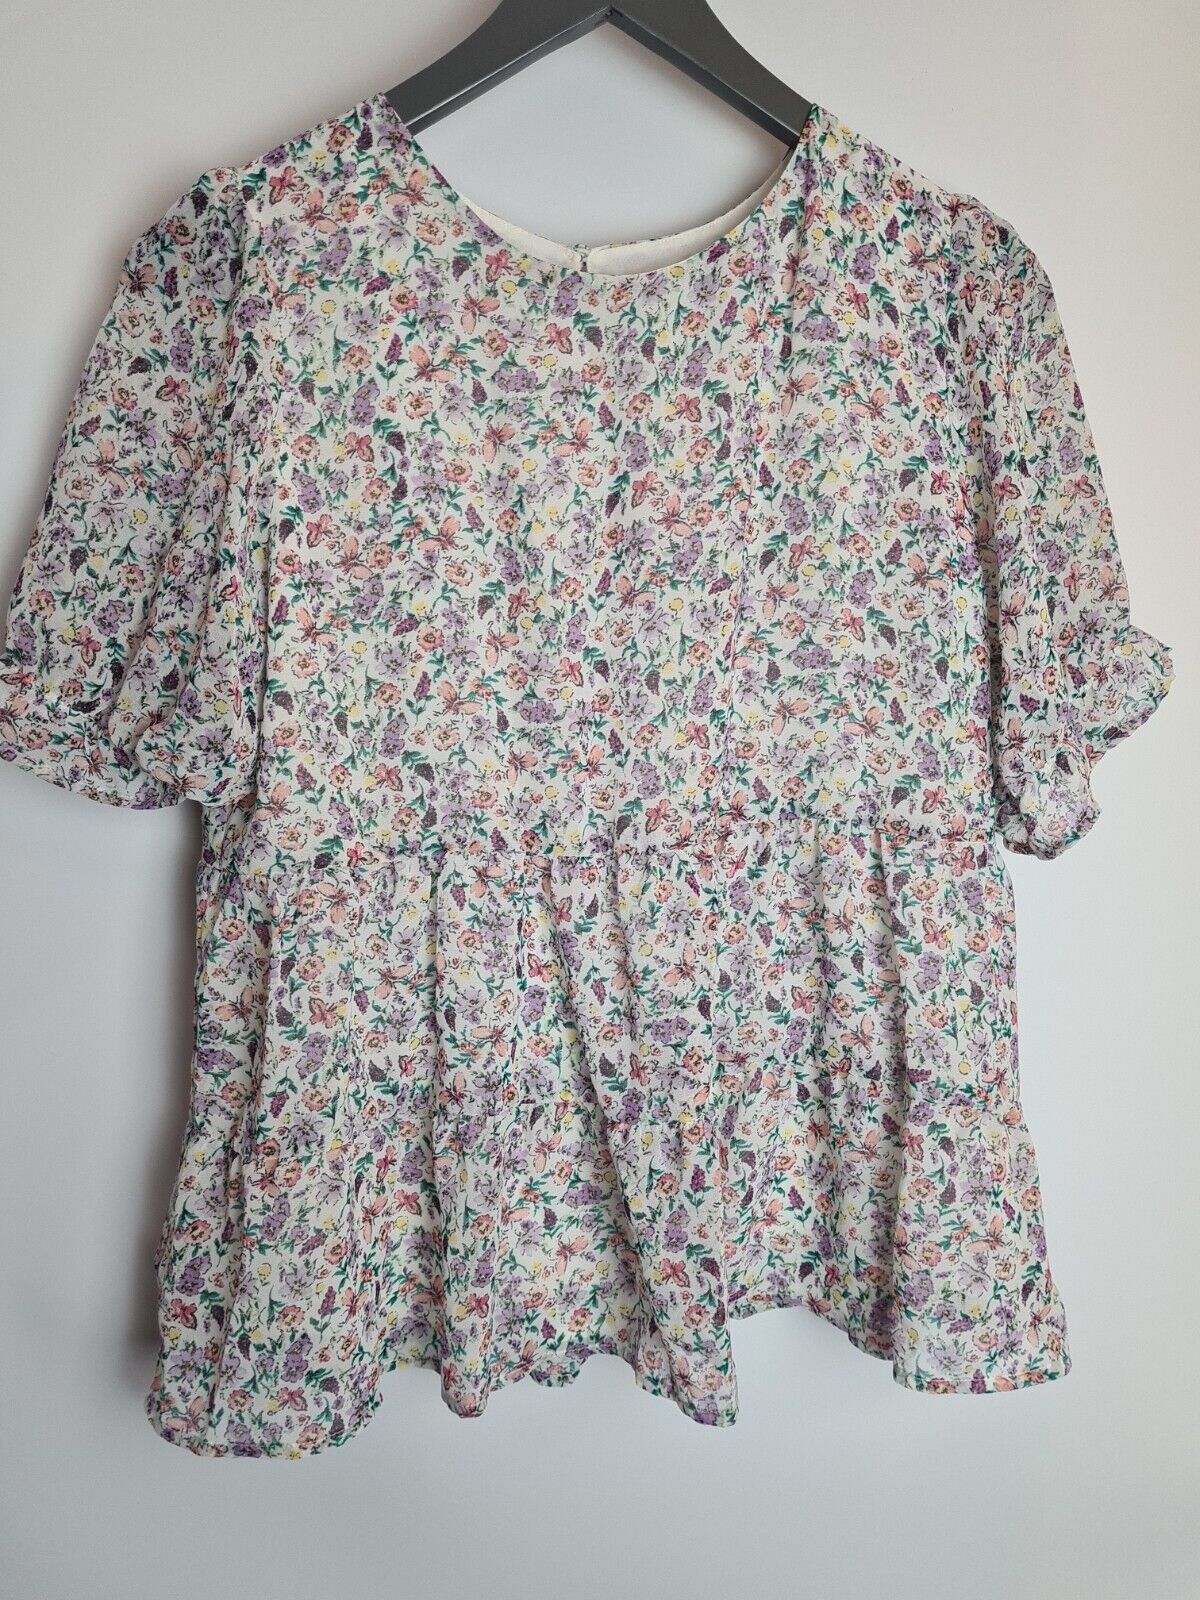 Apricot Floral Ruffle Tiered Top Size 12 **** V80